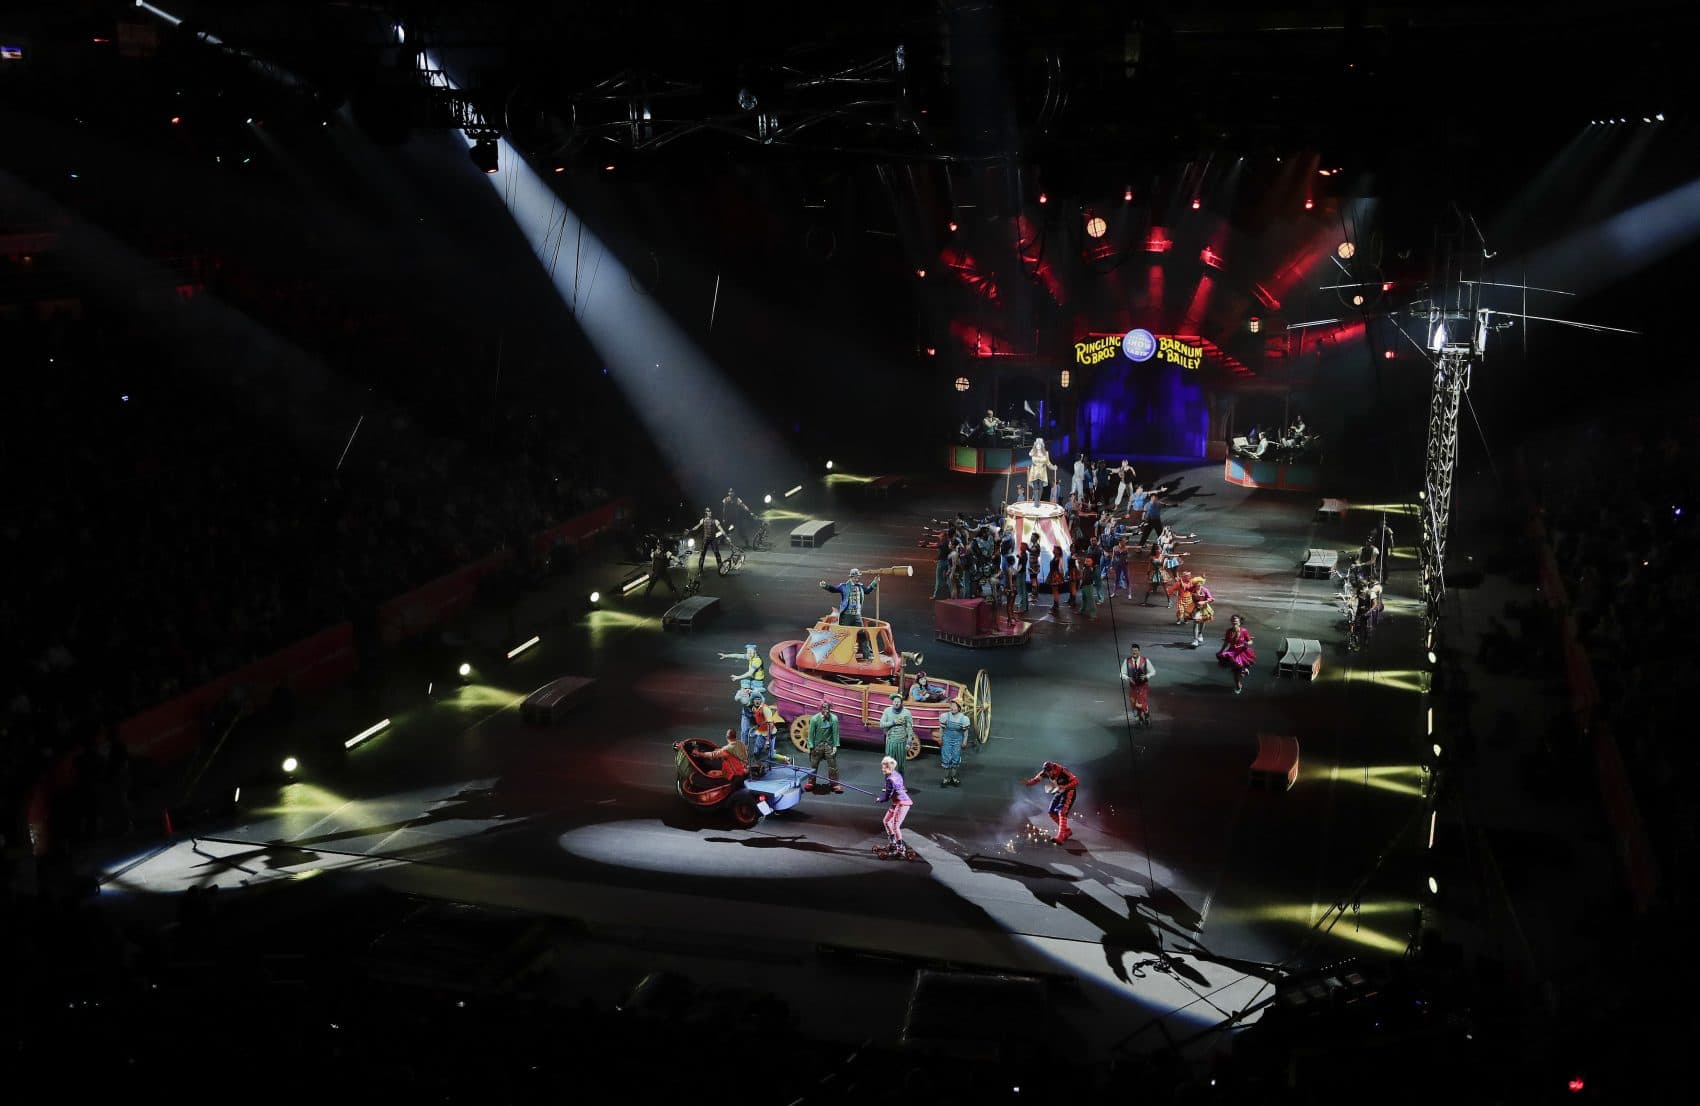 The red unit of Ringling Bros. and Barnum & Bailey circus opens a show on May 7 in Providence, R.I. (Julie Jacobson/AP)